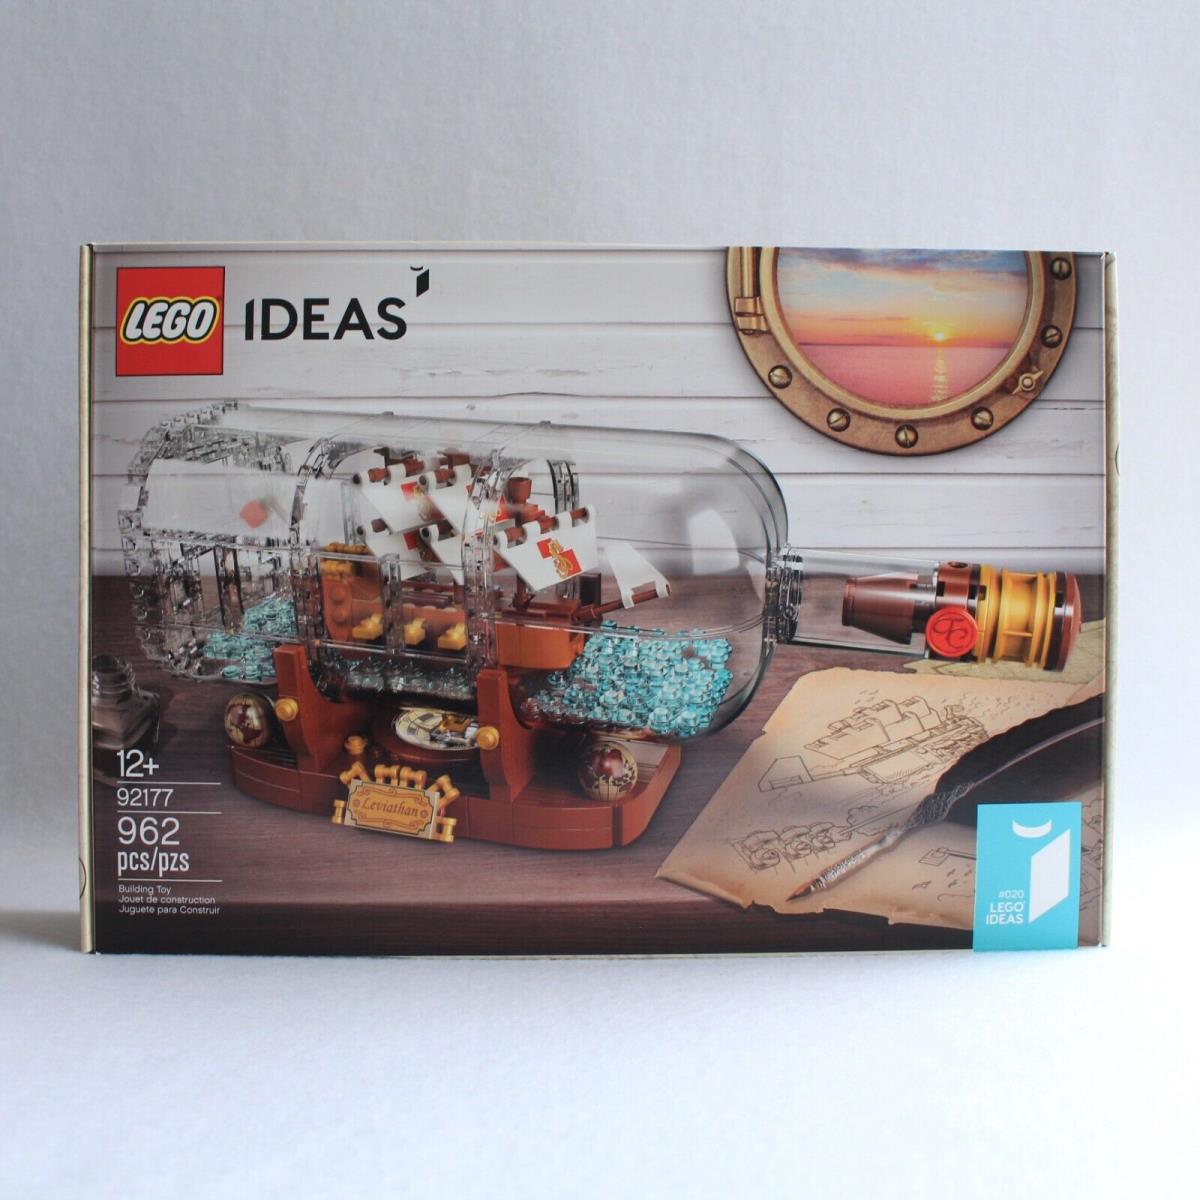 Lego Ideas 21313 Ship in a Bottle 92117 Retired Actual Item Shown